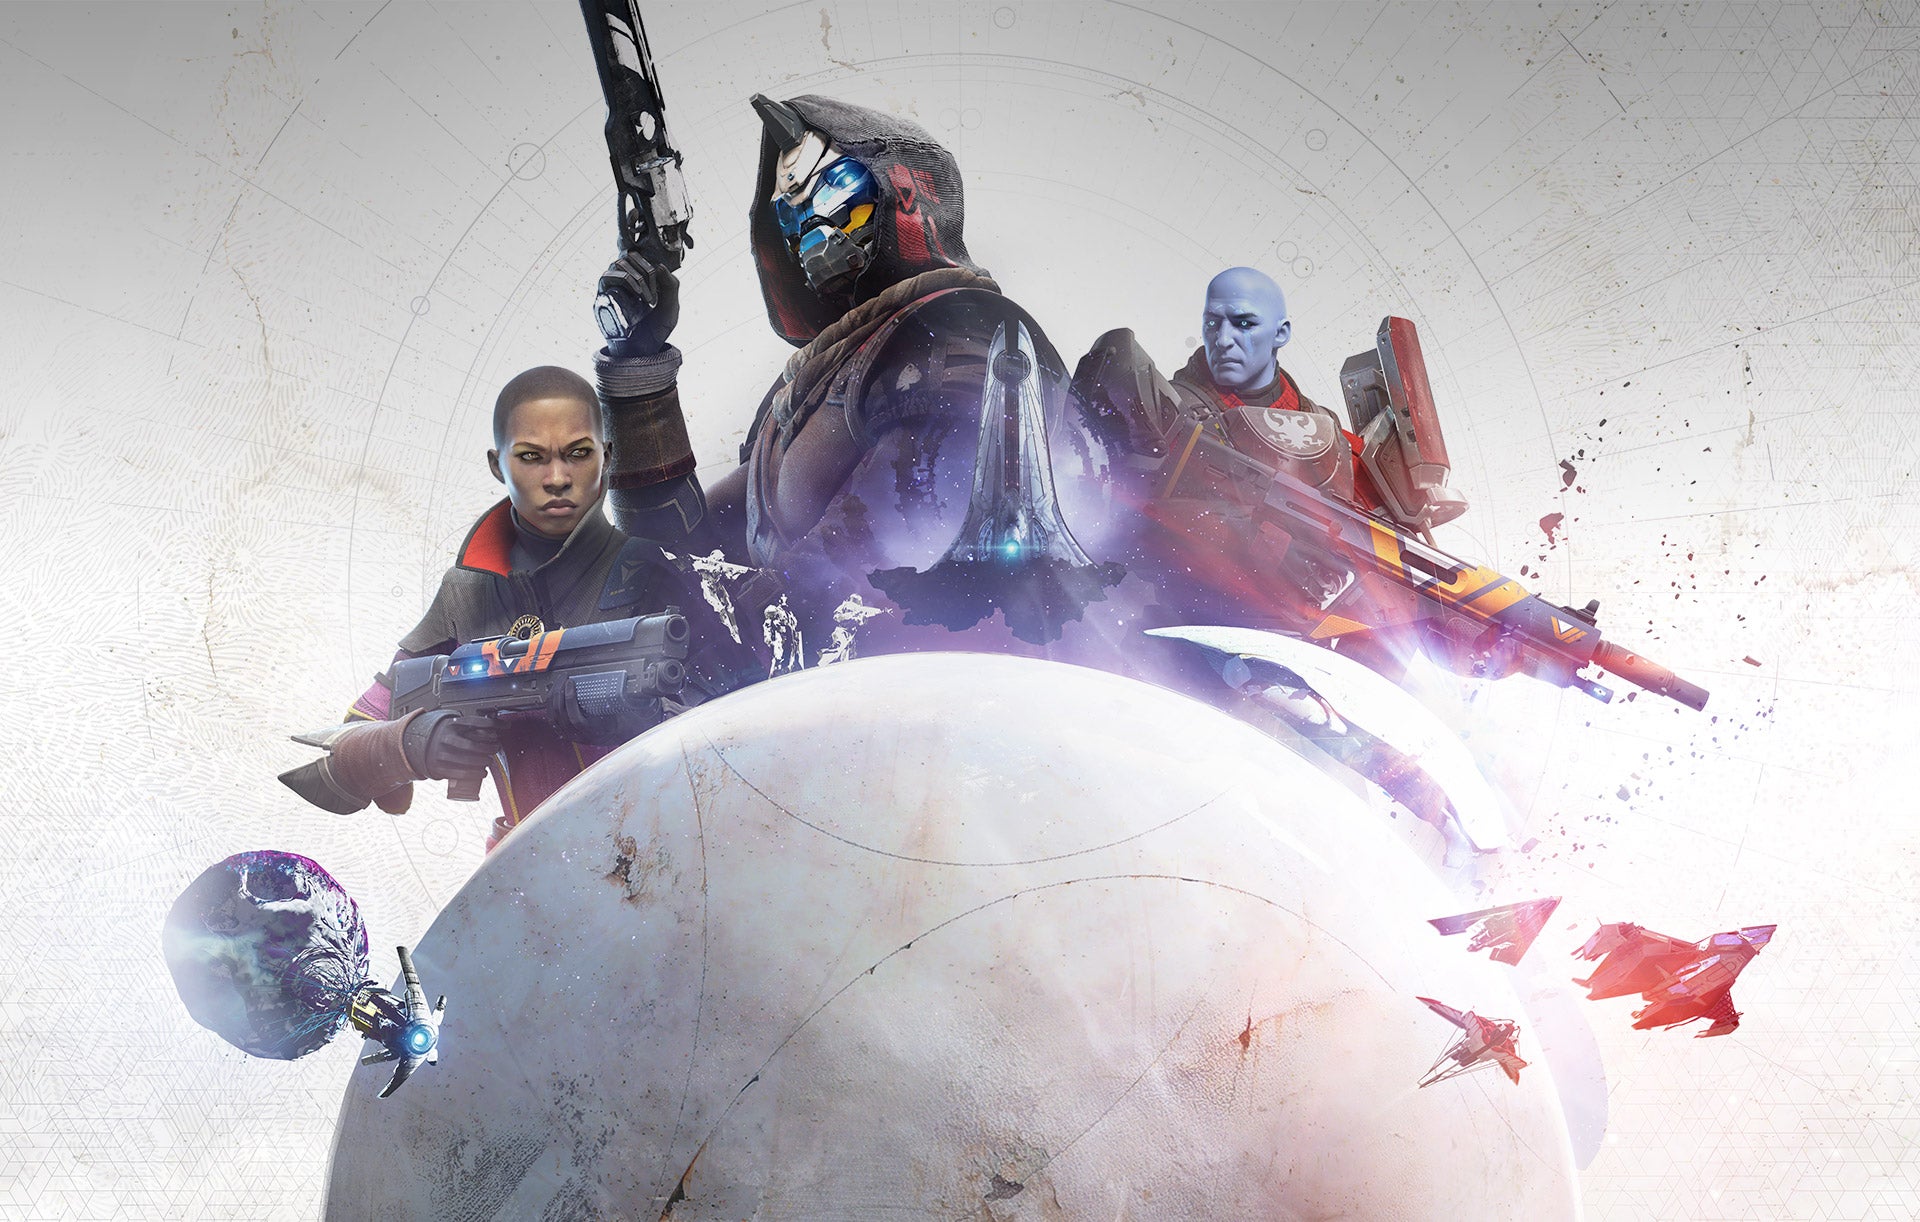 Image for Destiny 2 is coming off Battle.net because “it made the most sense at this point in time”